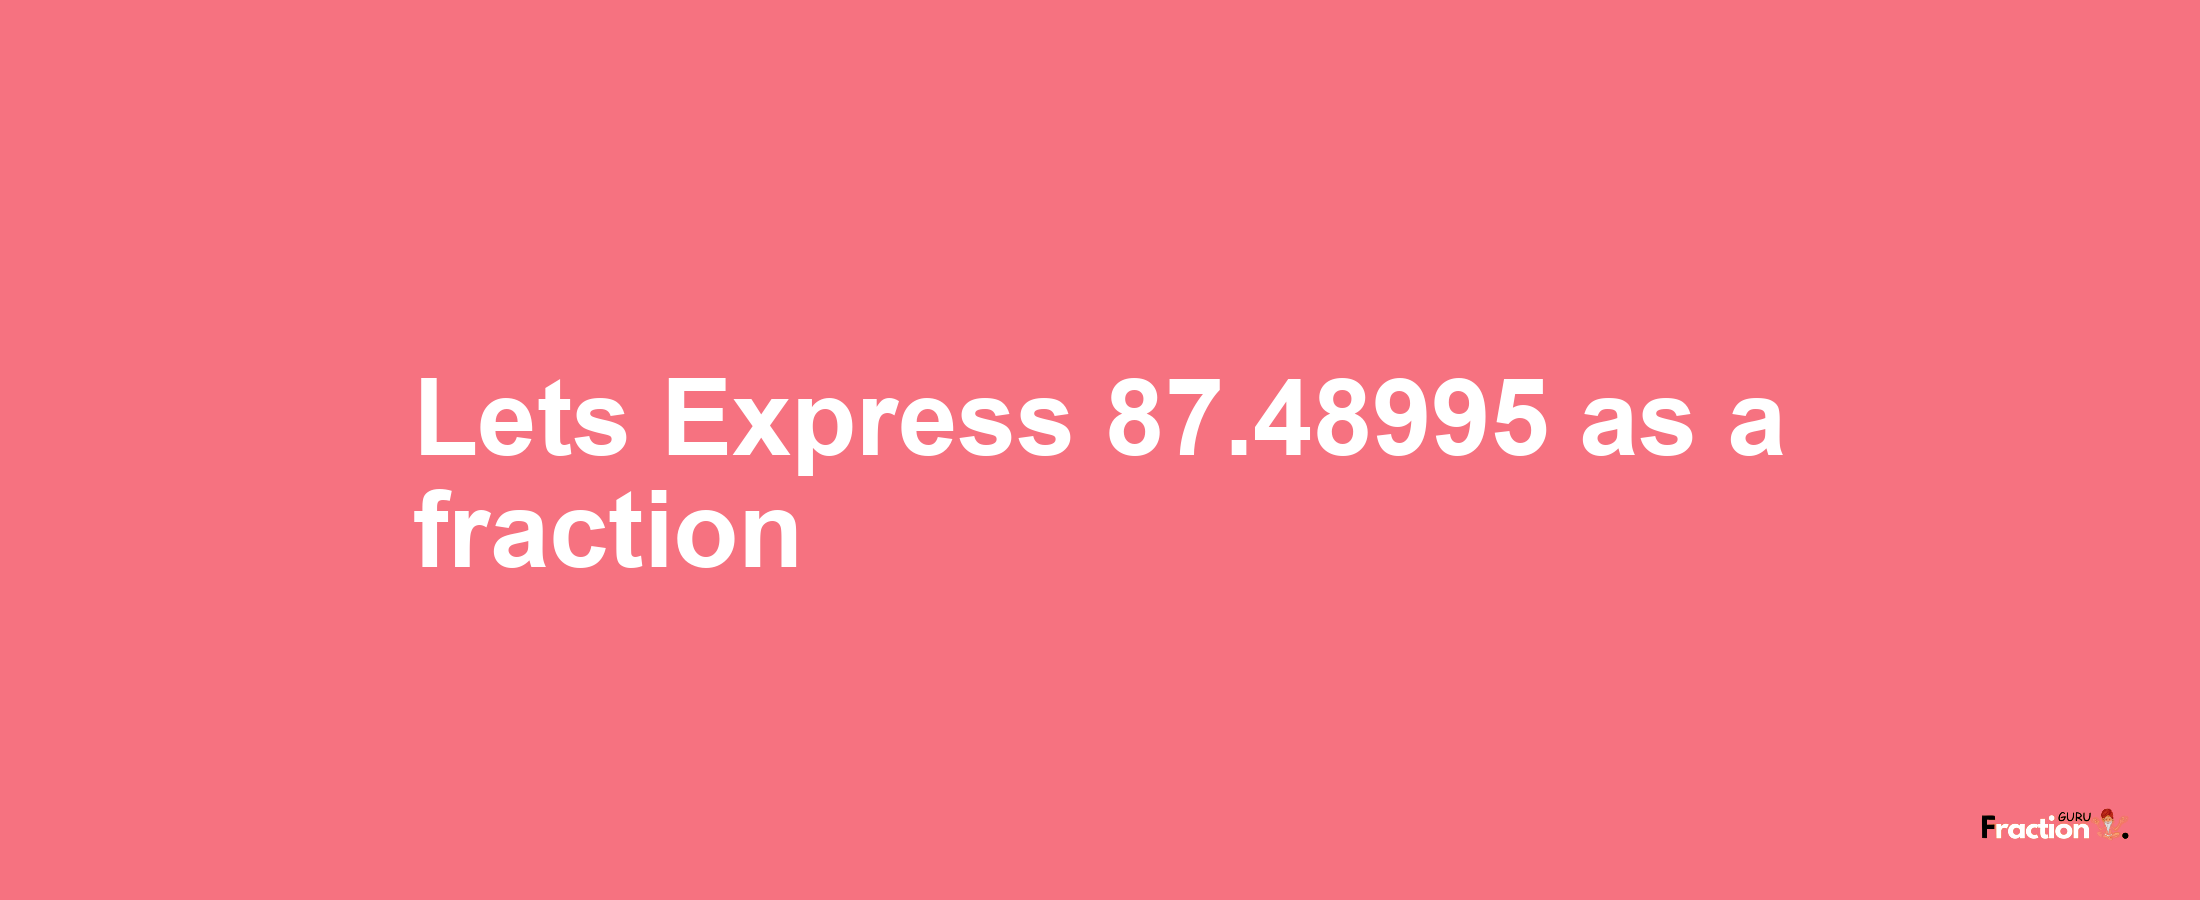 Lets Express 87.48995 as afraction